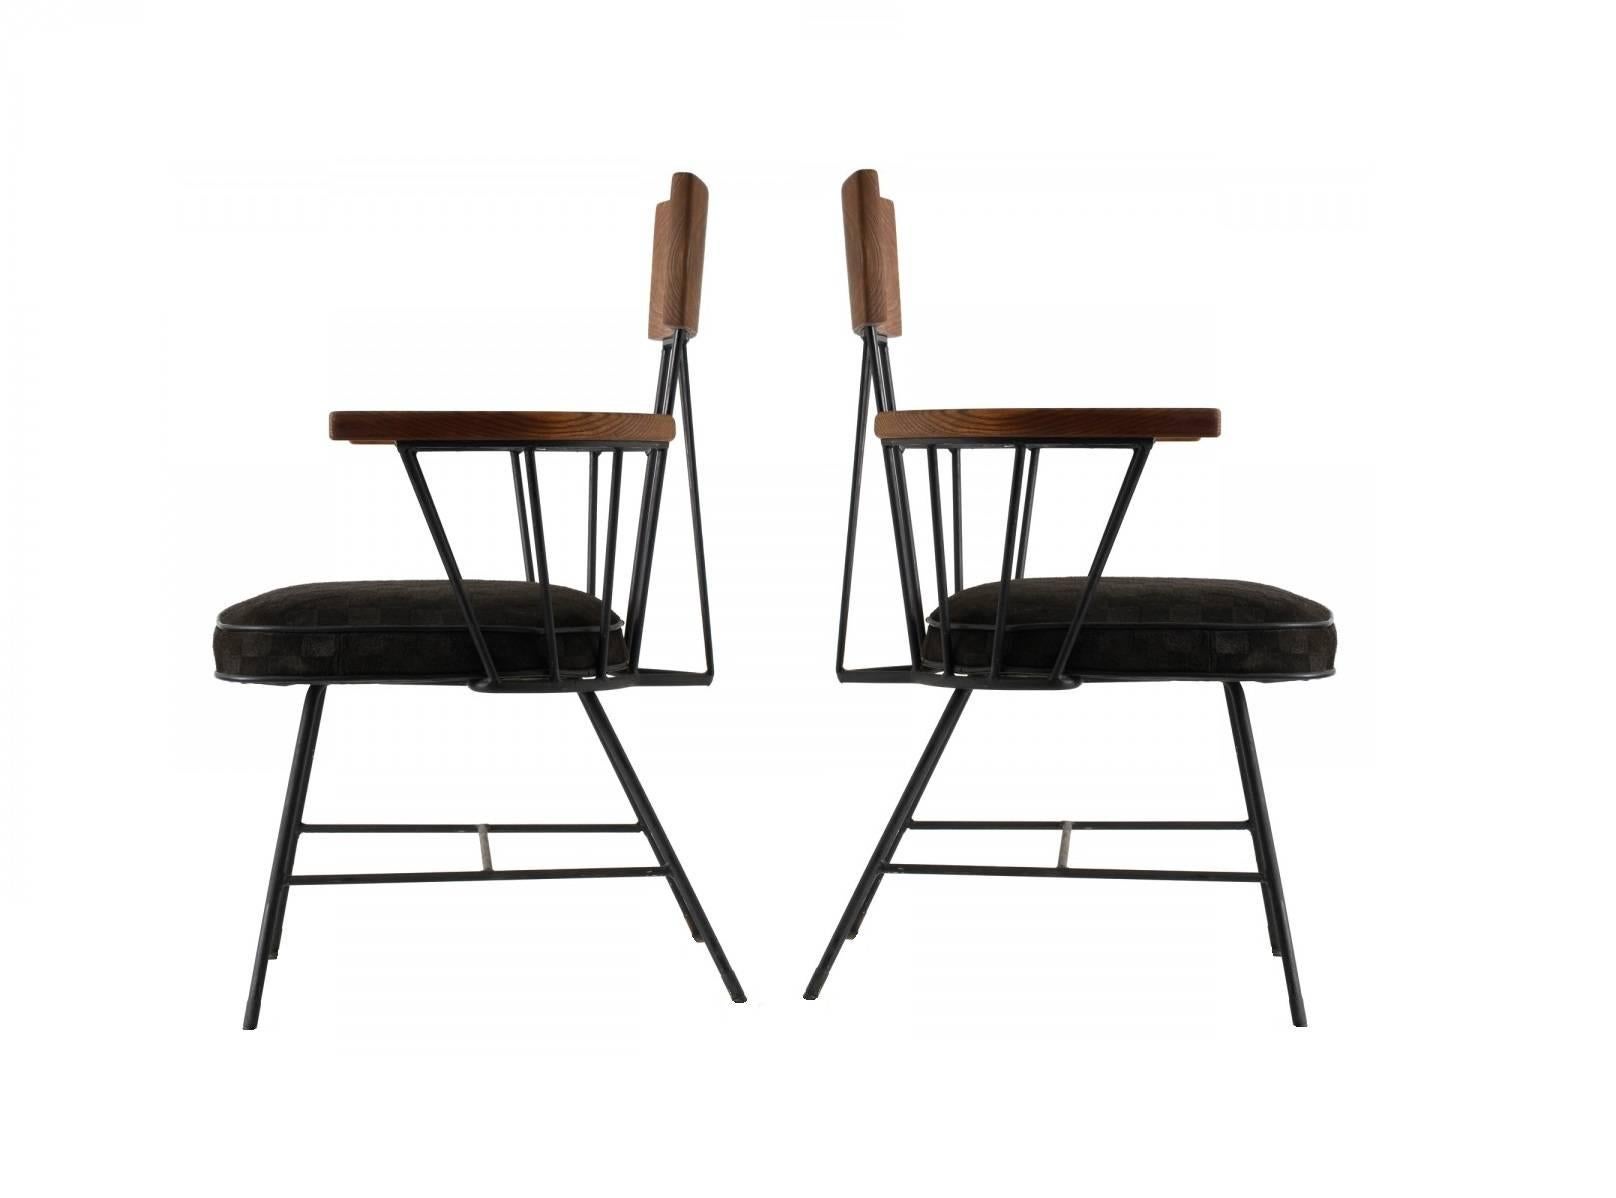 A unique set of ten dining chairs by Selrite. The black painted iron against the smooth grain of the wood perfectly embodies the Industrial feel of the era. Consists of eight arm and two armless chairs. The armchairs feature curved wood arms and